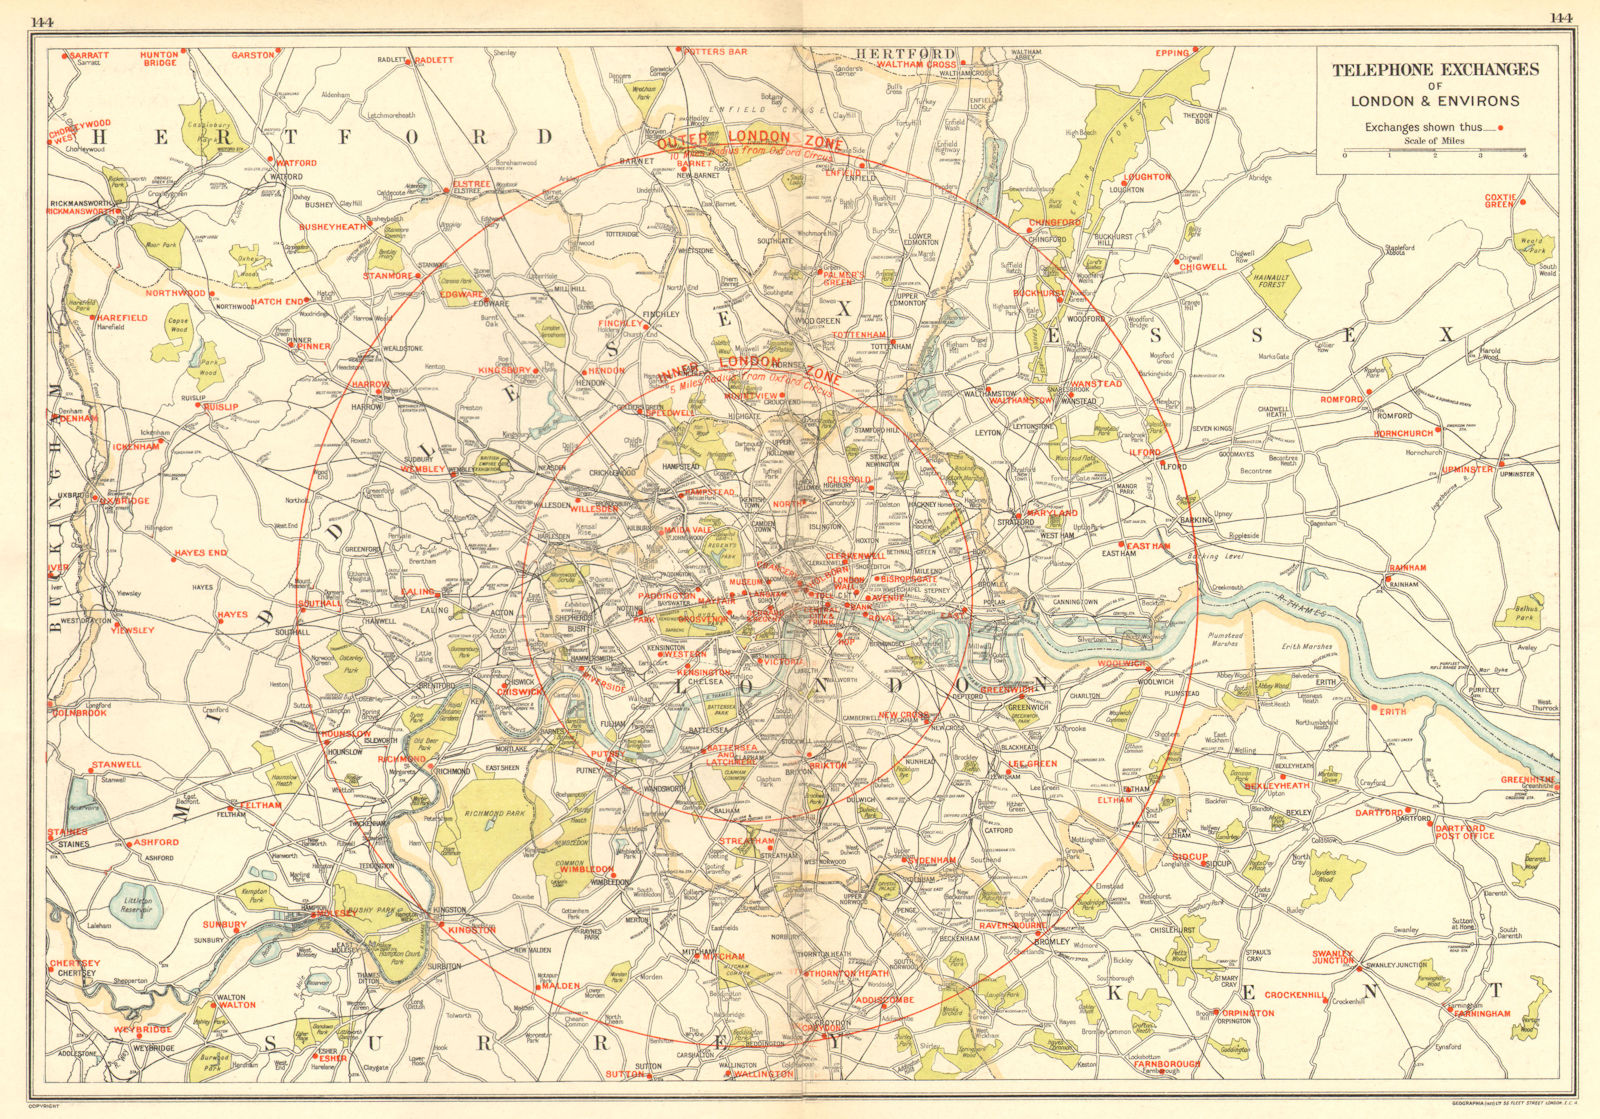 LONDON. Telephone Exchanges of London & Environs 1923 old antique map chart